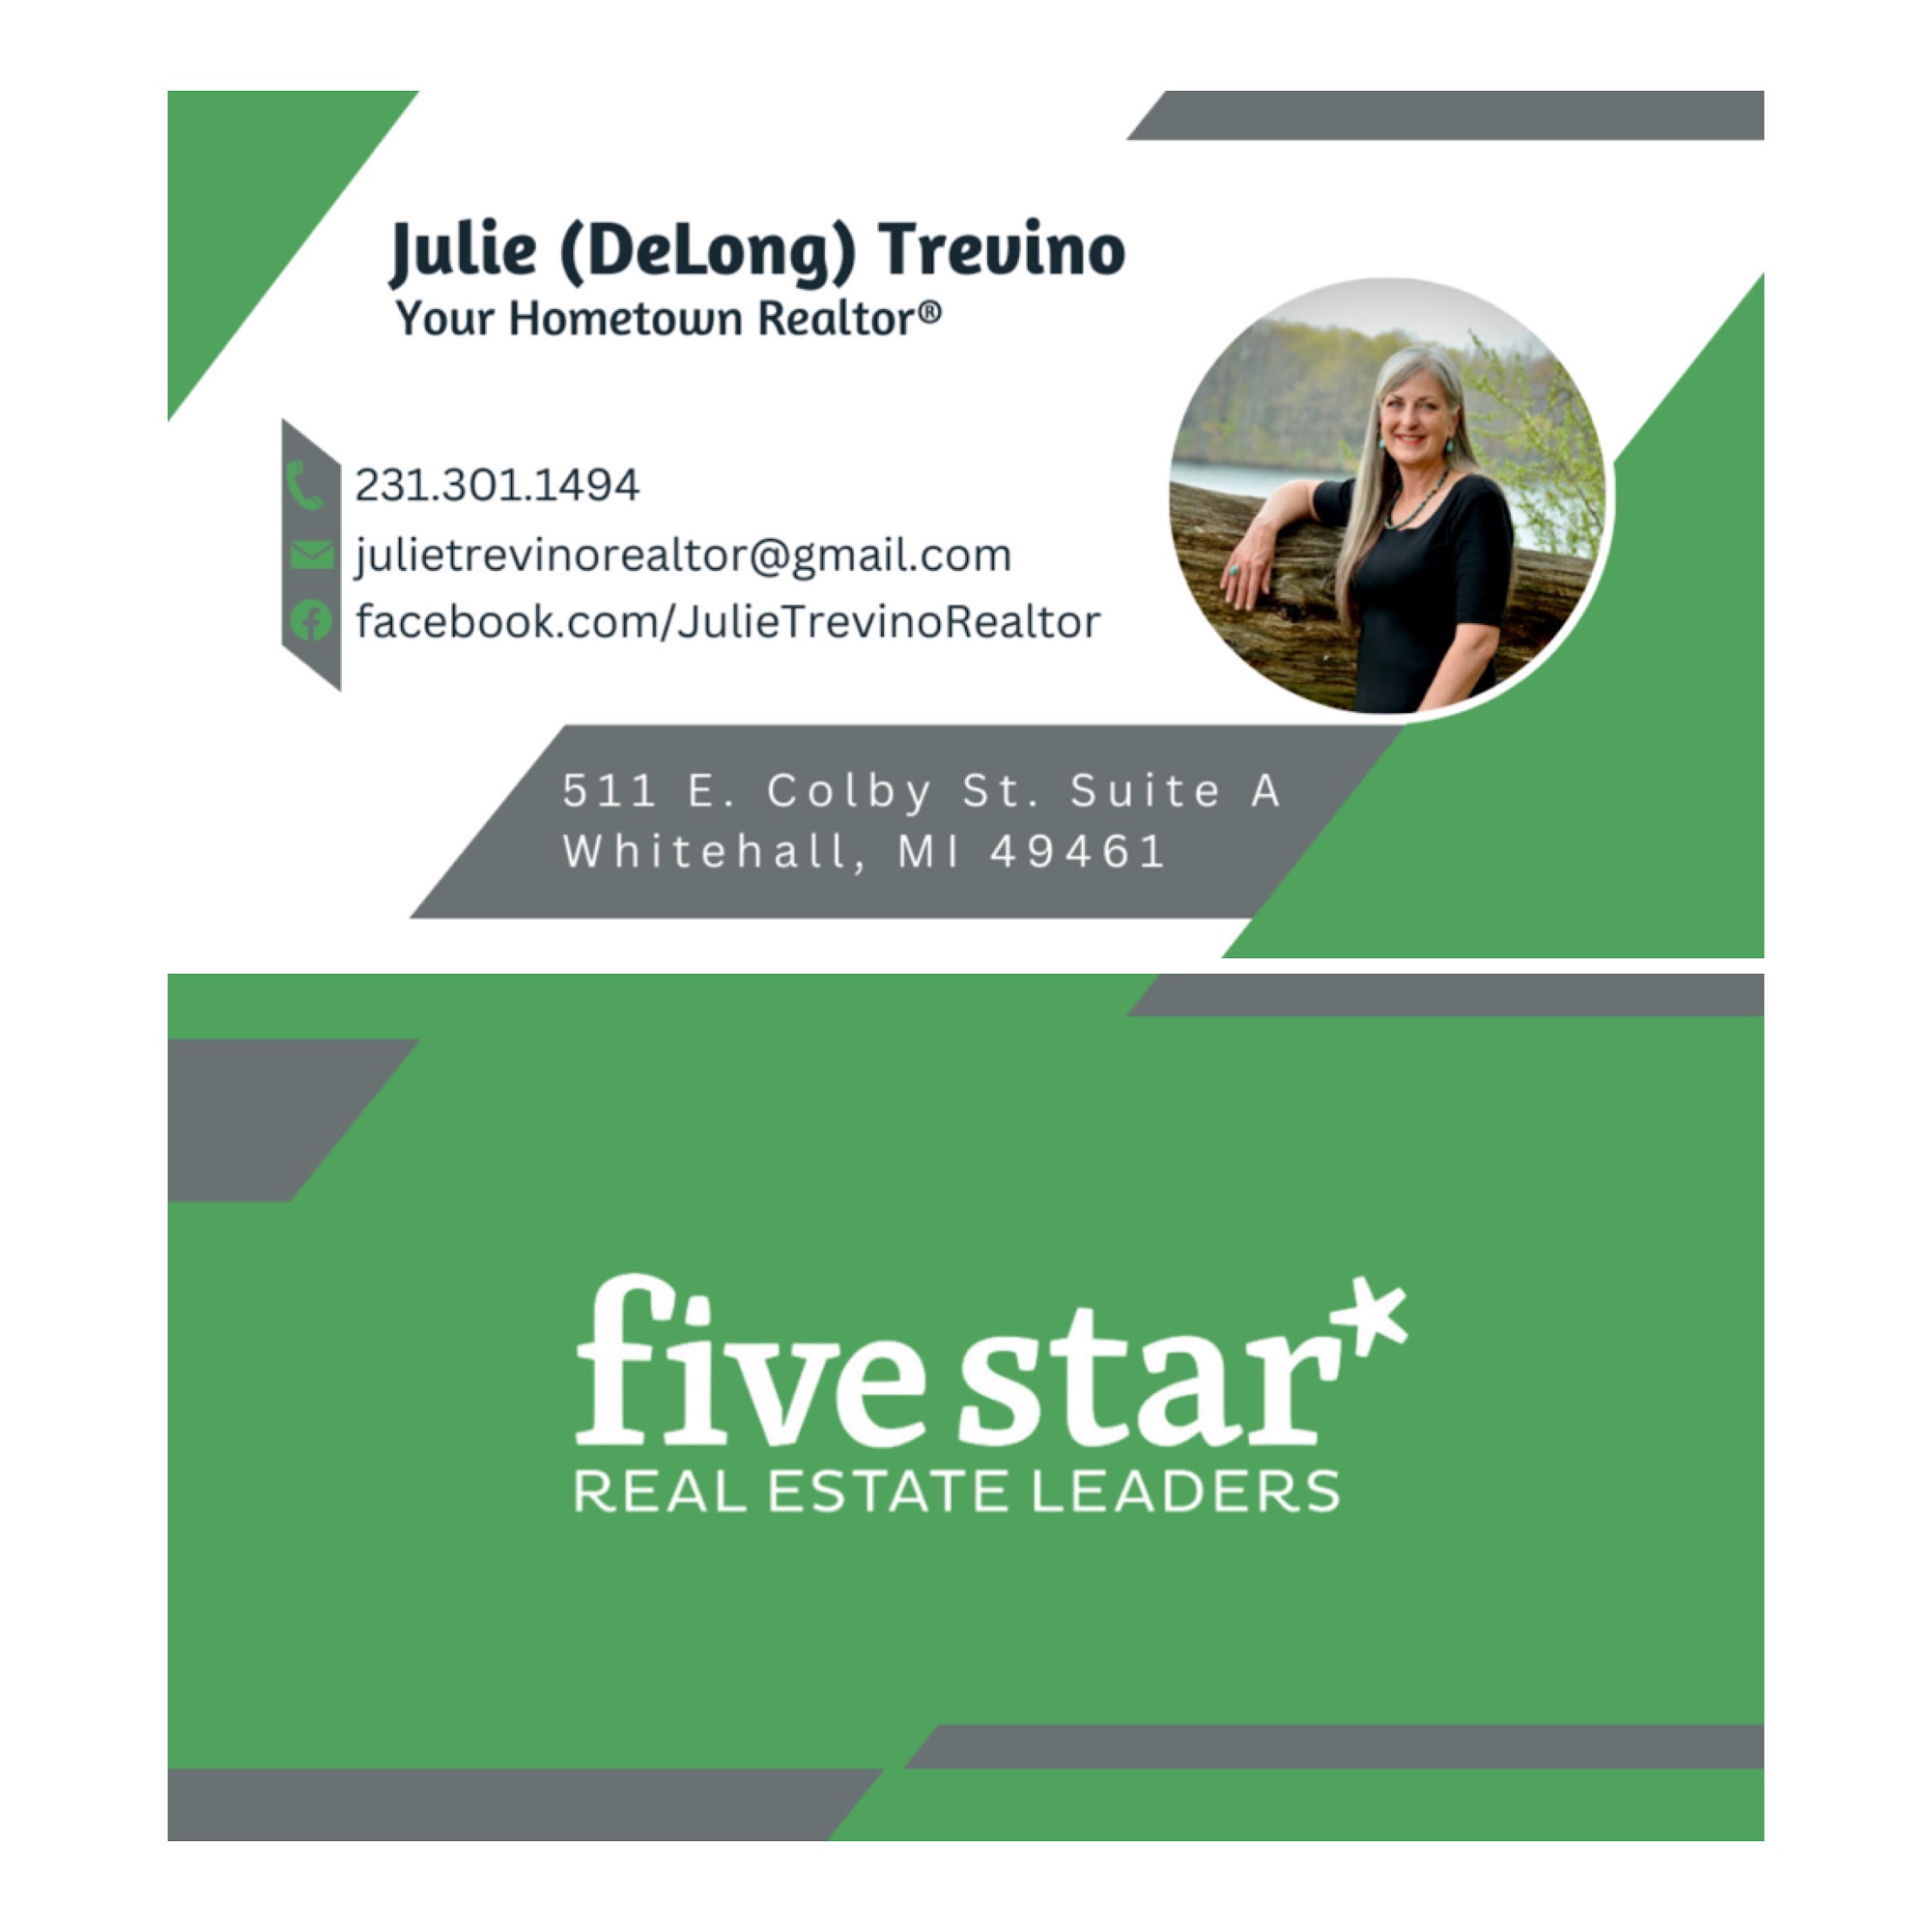 Julie Trevino - Five Star Real Estate 511 E Colby St suite a, Whitehall Michigan 49461